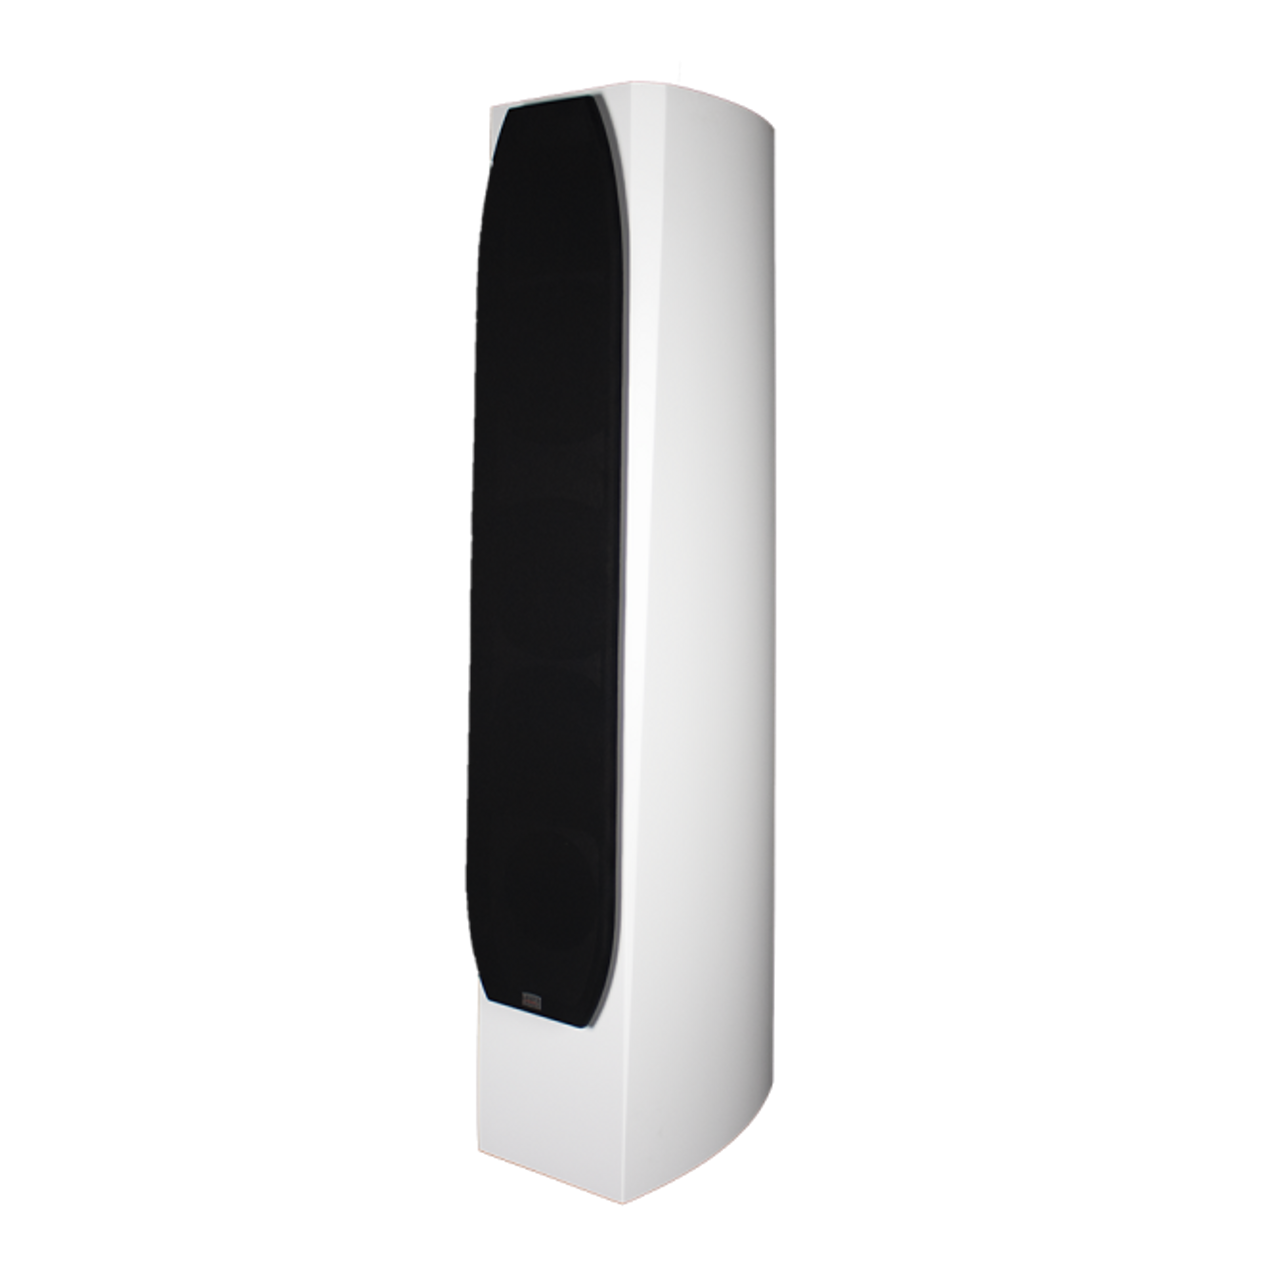 Phase Technology PC9.5 Home Theater Tower Speaker (PC9.5BL-)